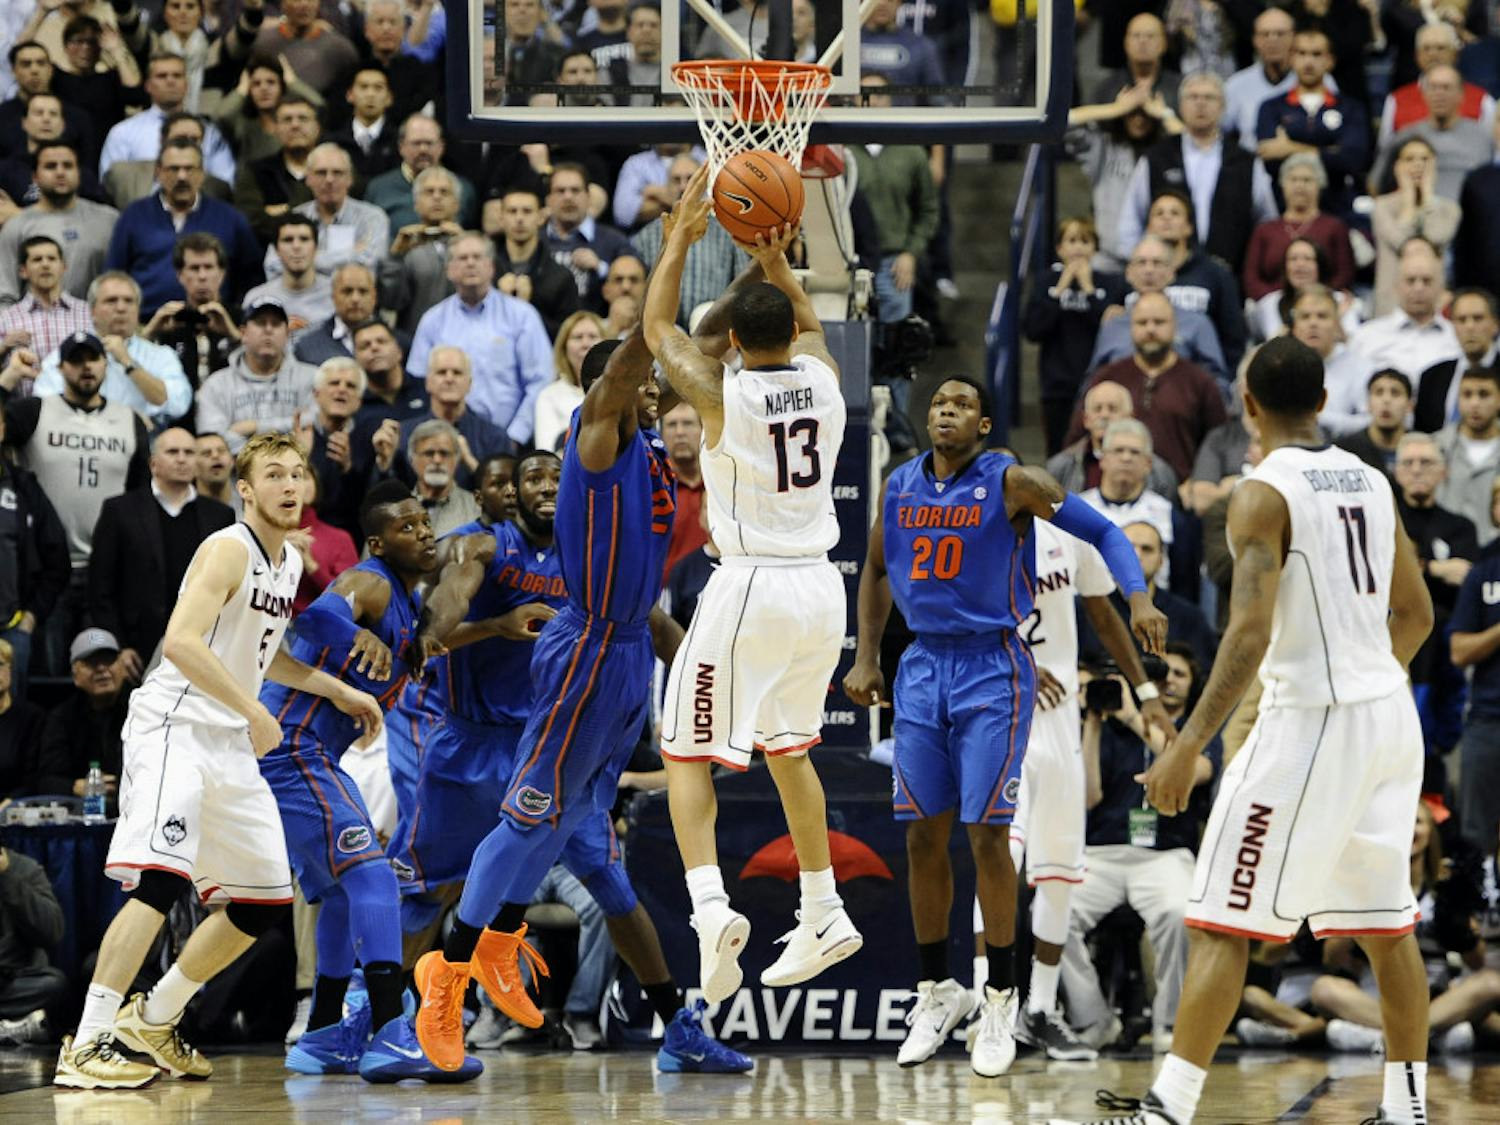 Connecticut's Shabazz Napier (13) goes up for the game winning basket at the buzzer during its 65-64 win against Florida on Monday in Storrs, Conn.